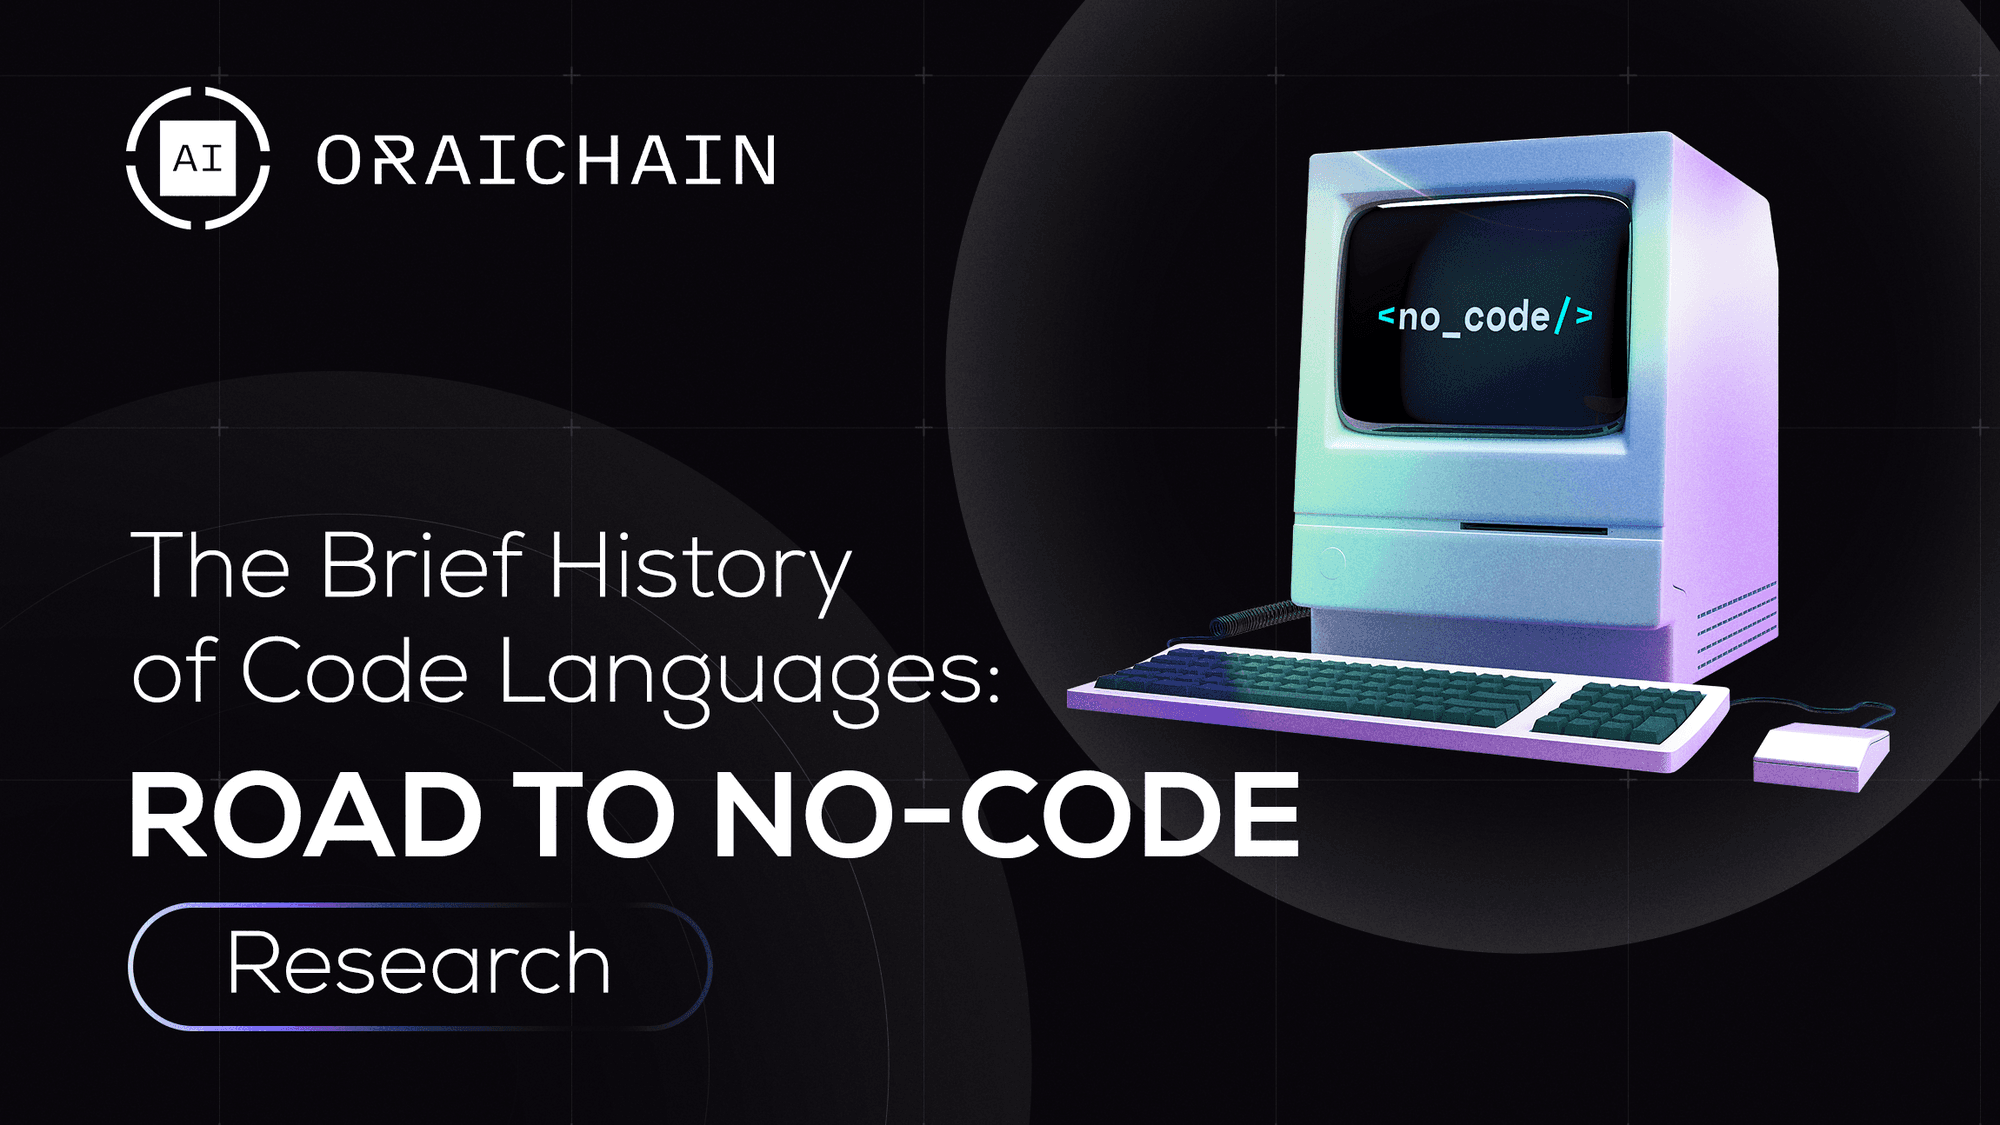 The Brief History of Code Languages: Road to No-code